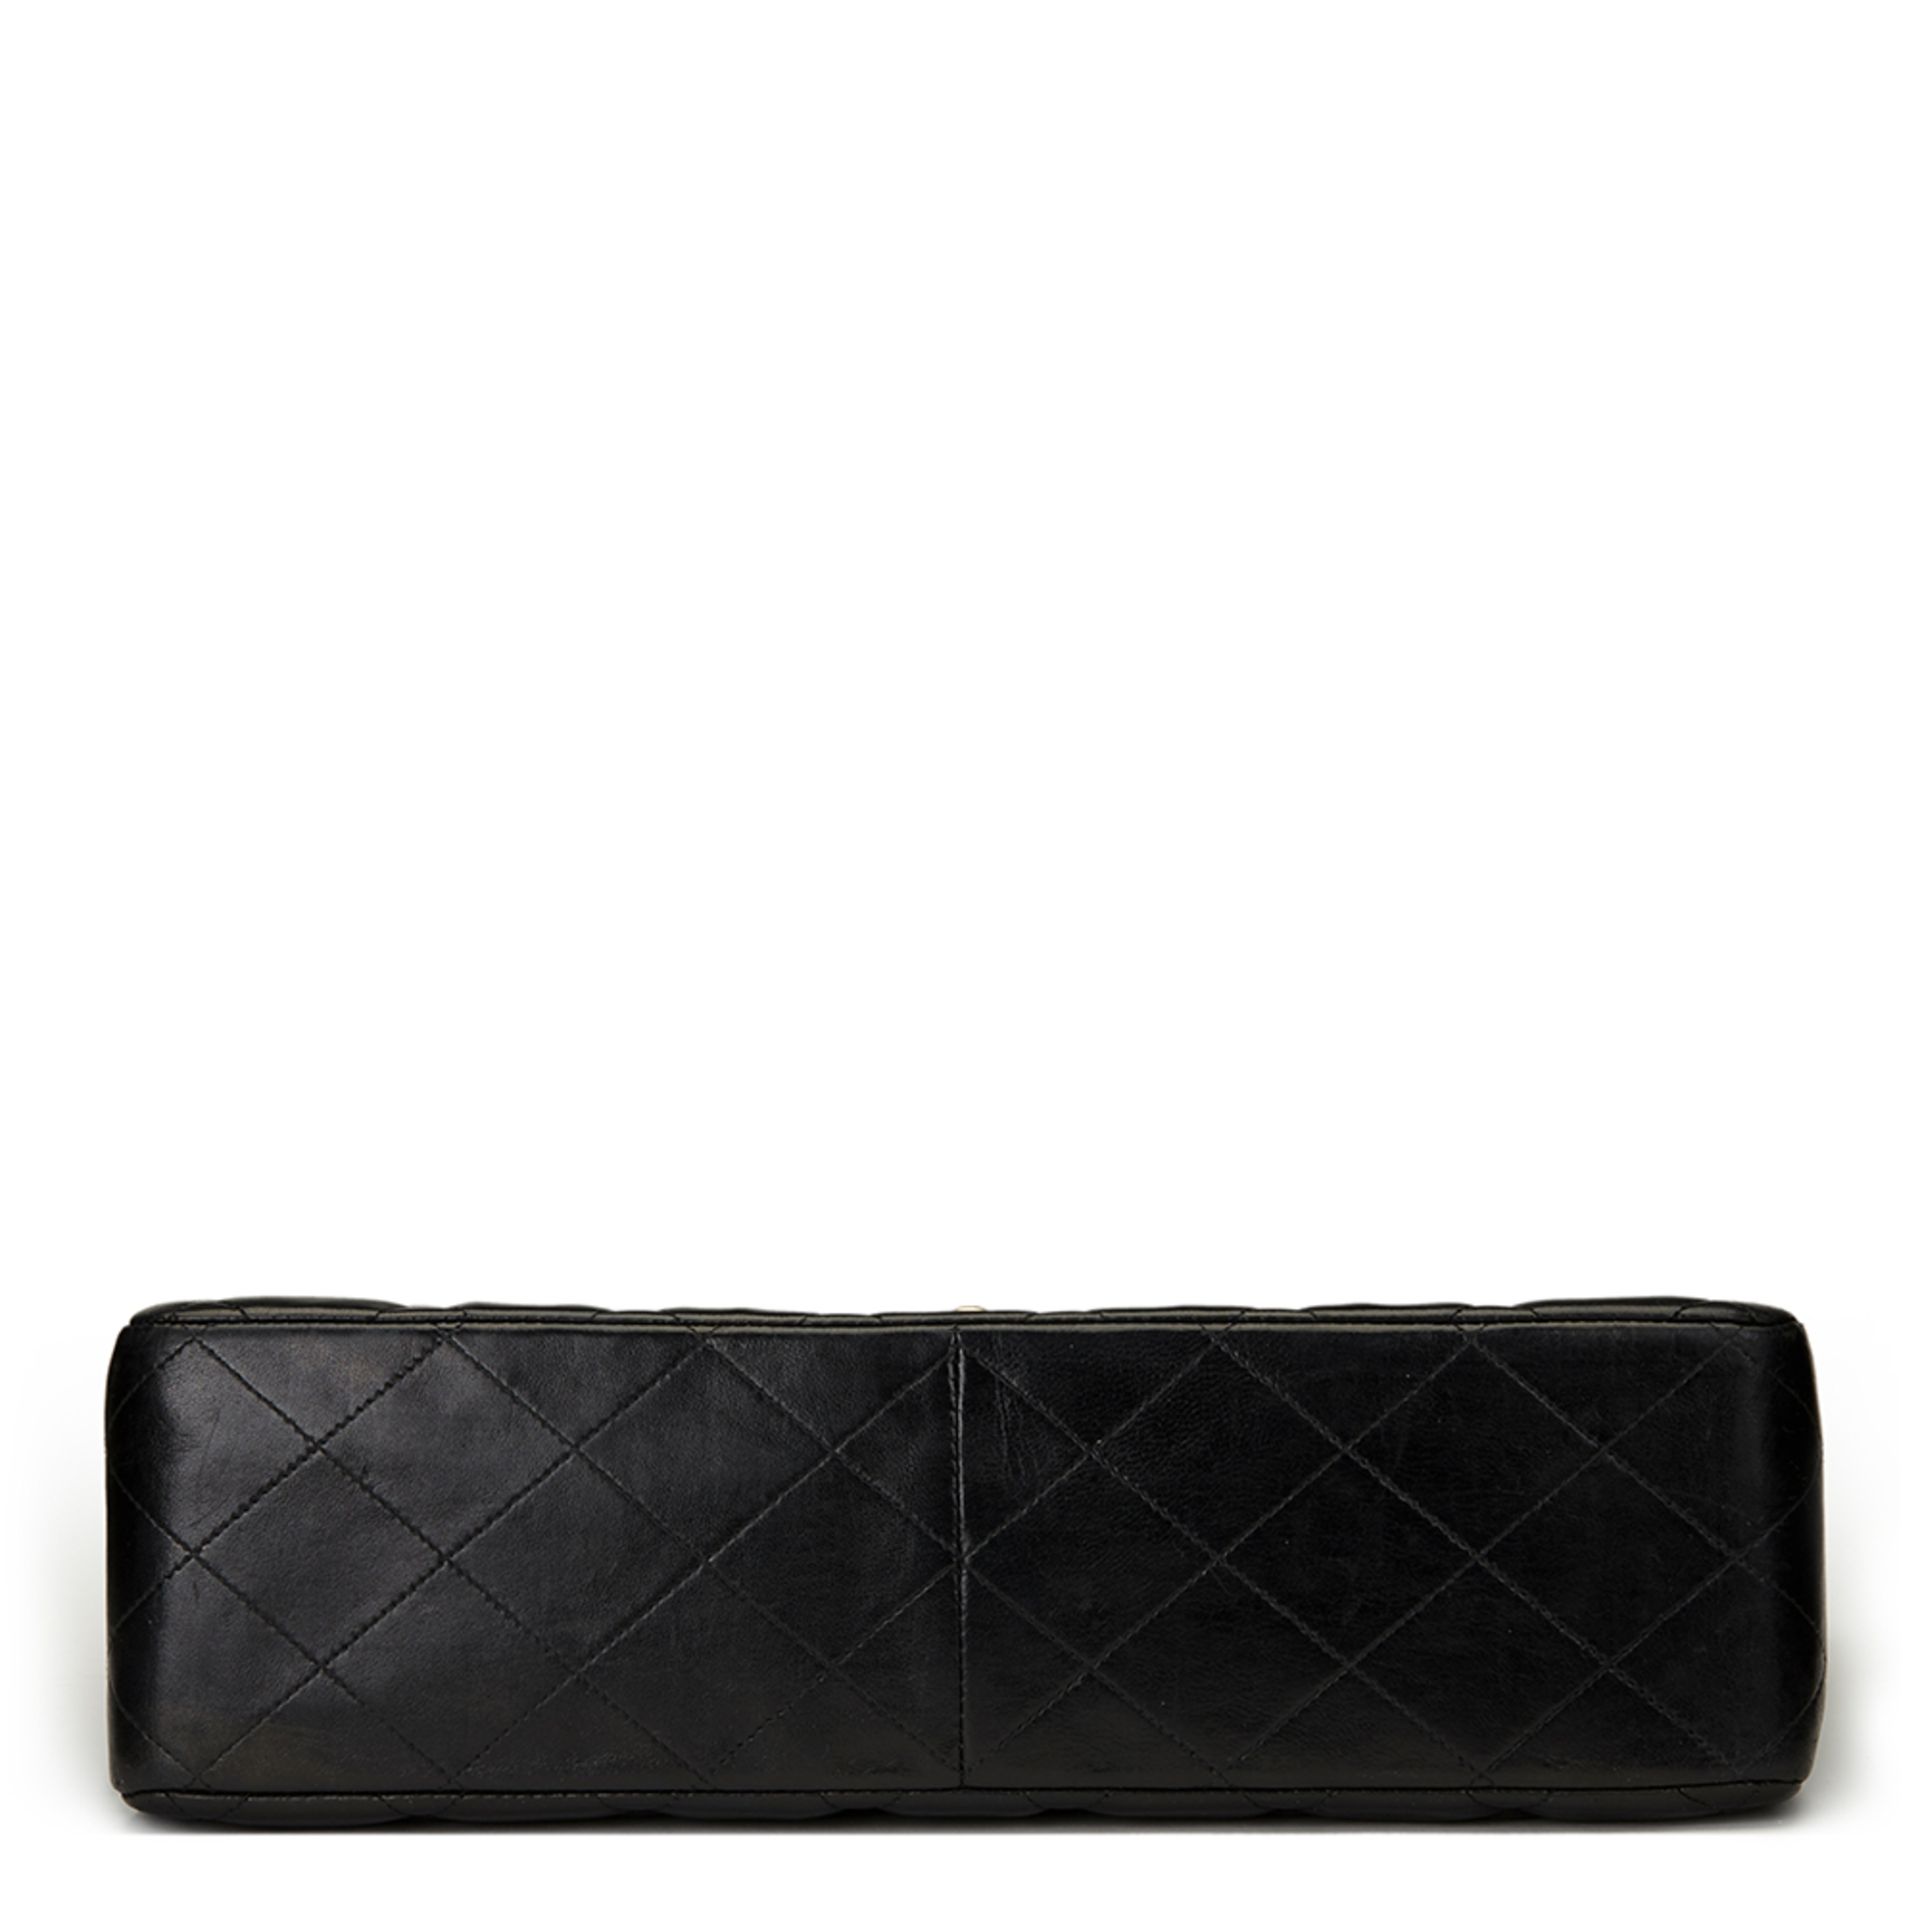 Chanel Black Quilted Lambskin Jumbo Classic Single Flap Bag - Image 4 of 11